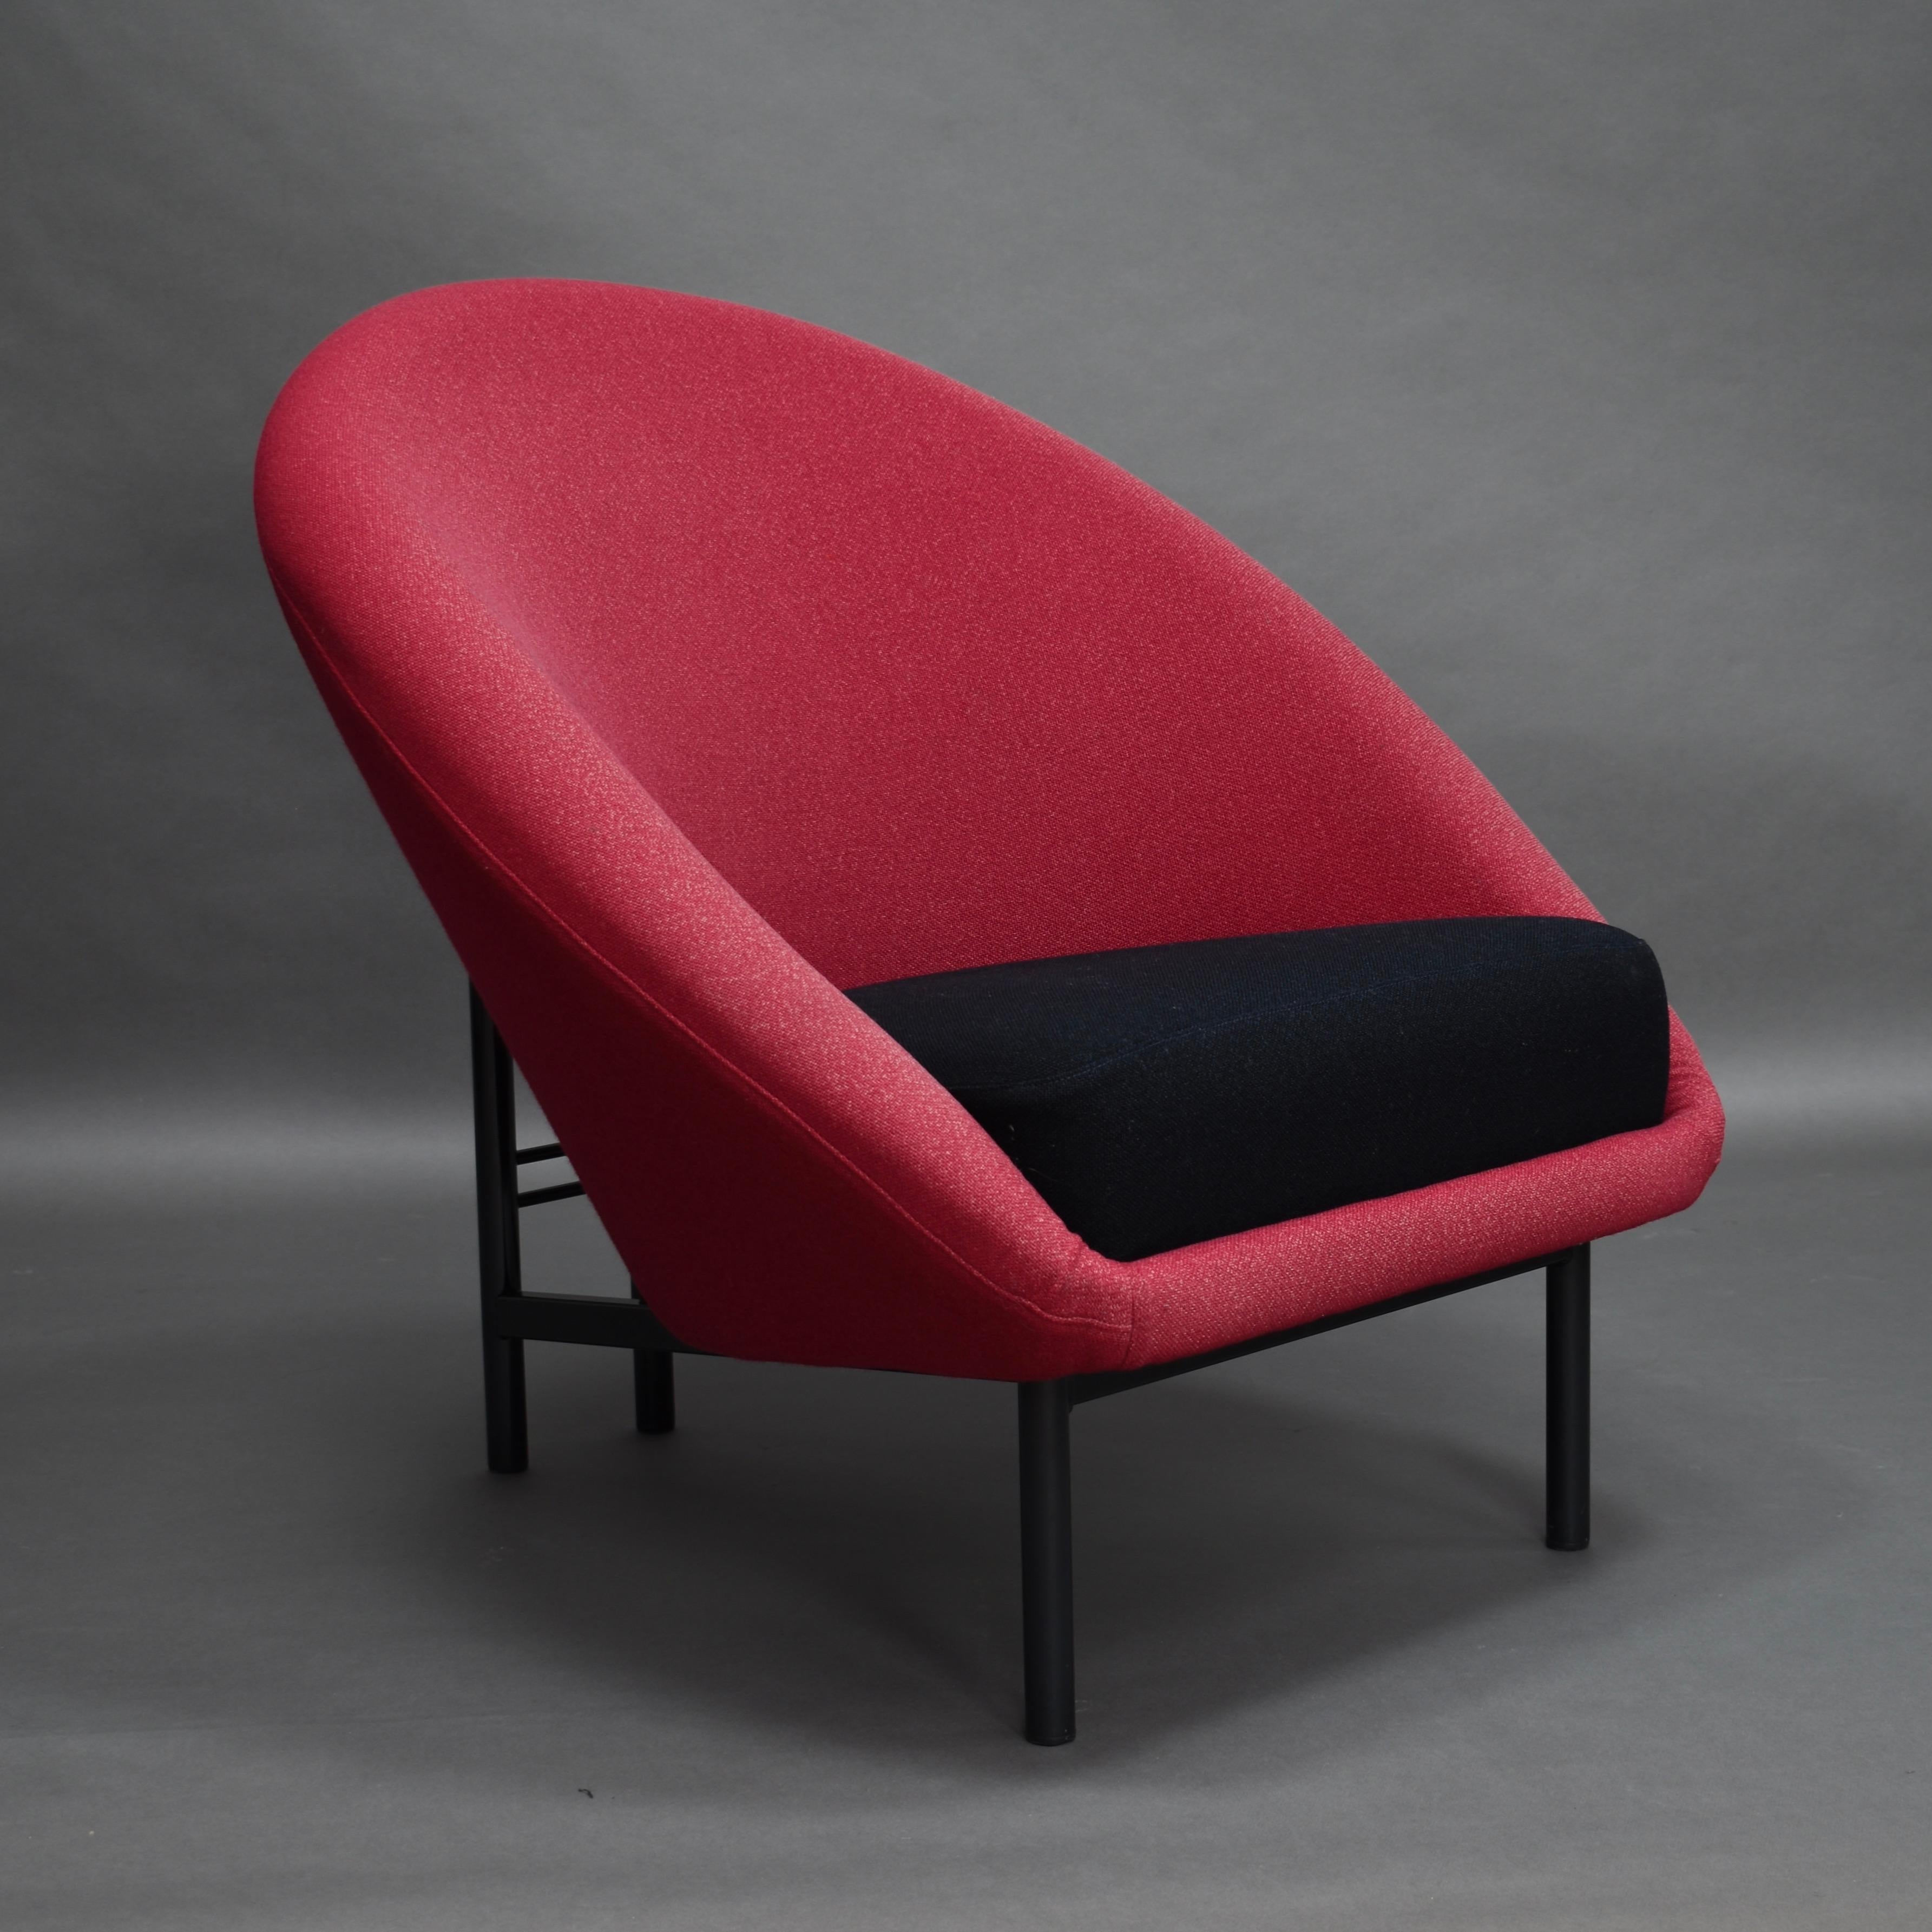 F815 armchair by Theo Ruth for Artifort, Netherlands, 1958.
This is a rare, amazing and sophisticated center-piece.
  

The fabric is a woven wool fabric by De Ploegstof. It is in good condition but shows signs of fading. The foam is in very